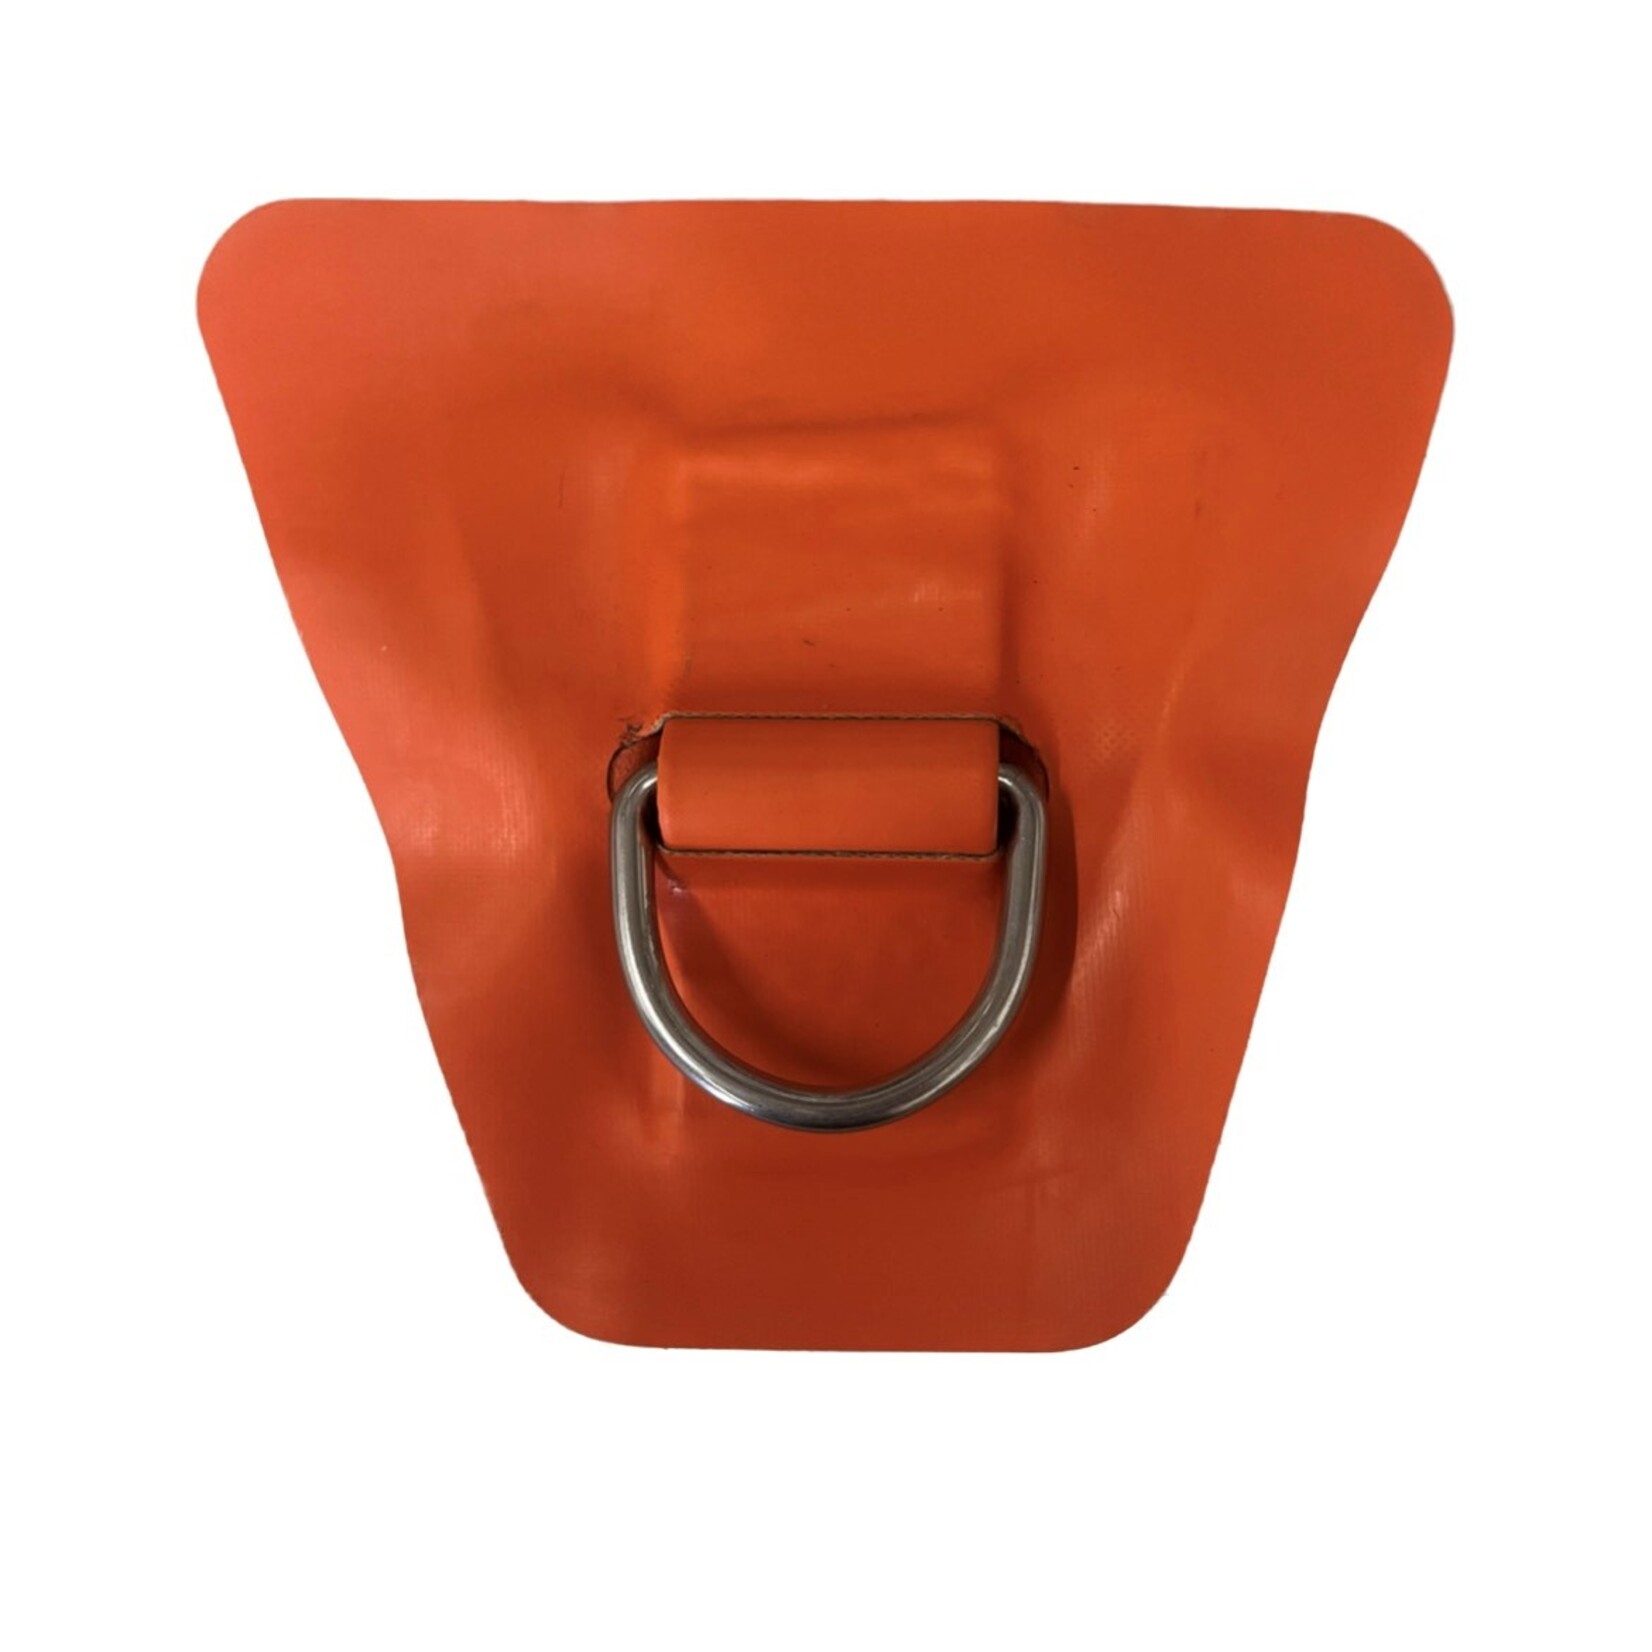 Hyside Inflatables Hyside 2" Trapezoid Hypalon D-ring